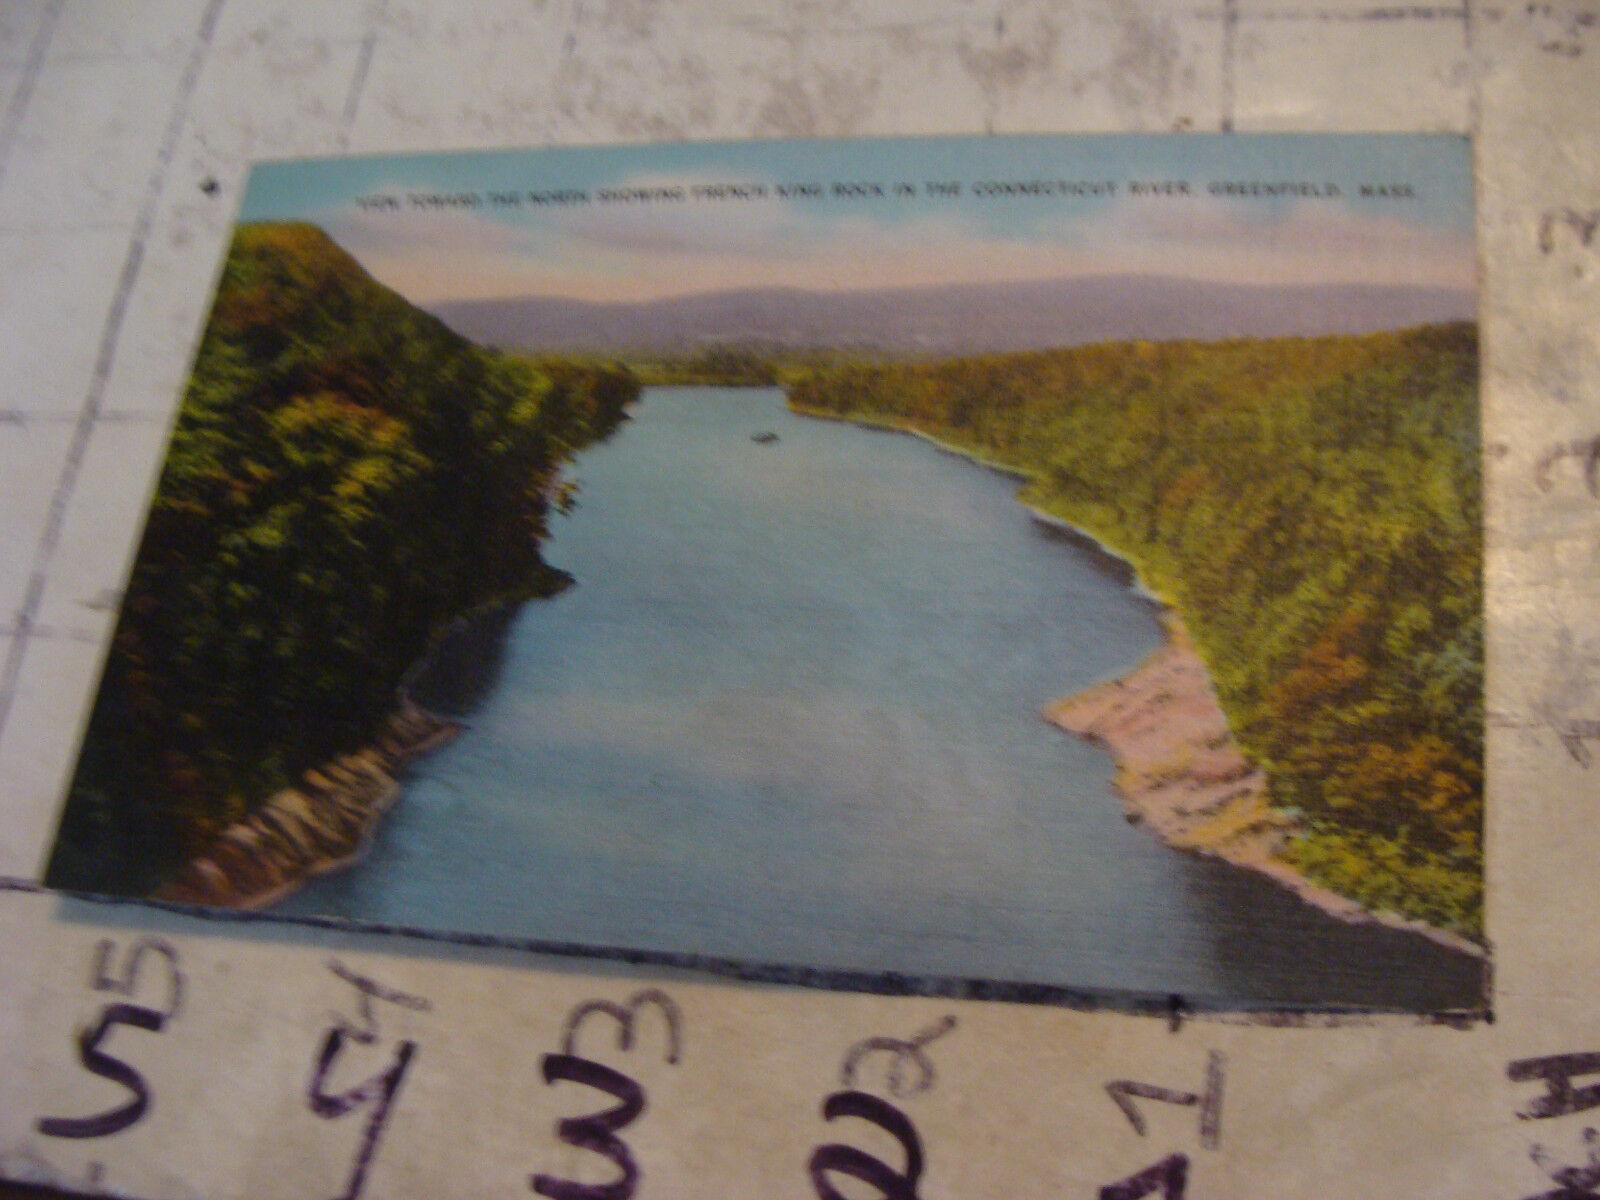 Orig Vint post card FRENCH KING ROCK in CONNECTICUT RIVER--GREENFIELD MASS 1942